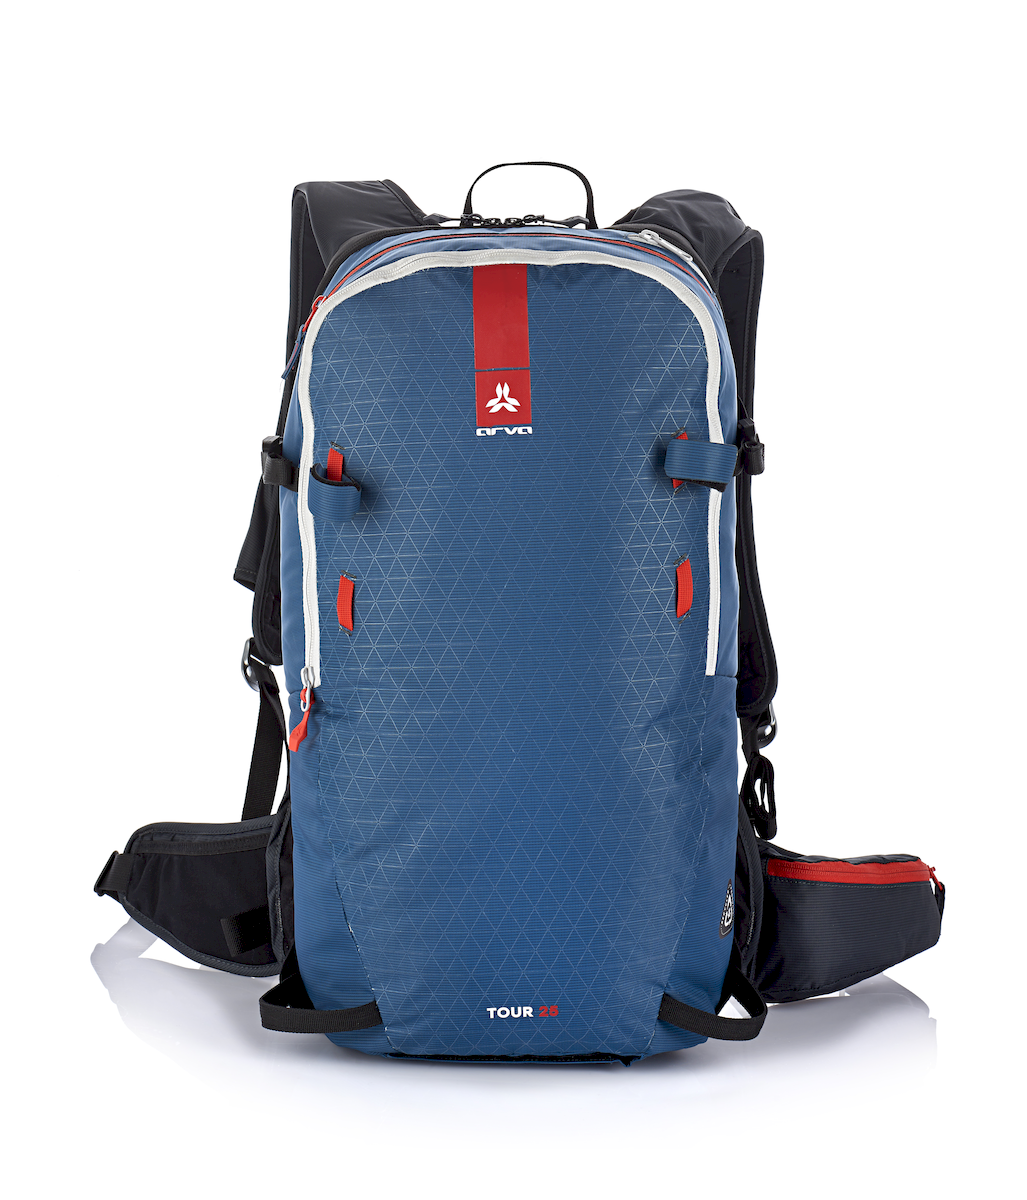 Arva Airbag Reactor Tour25 - Avalanche airbag backpack